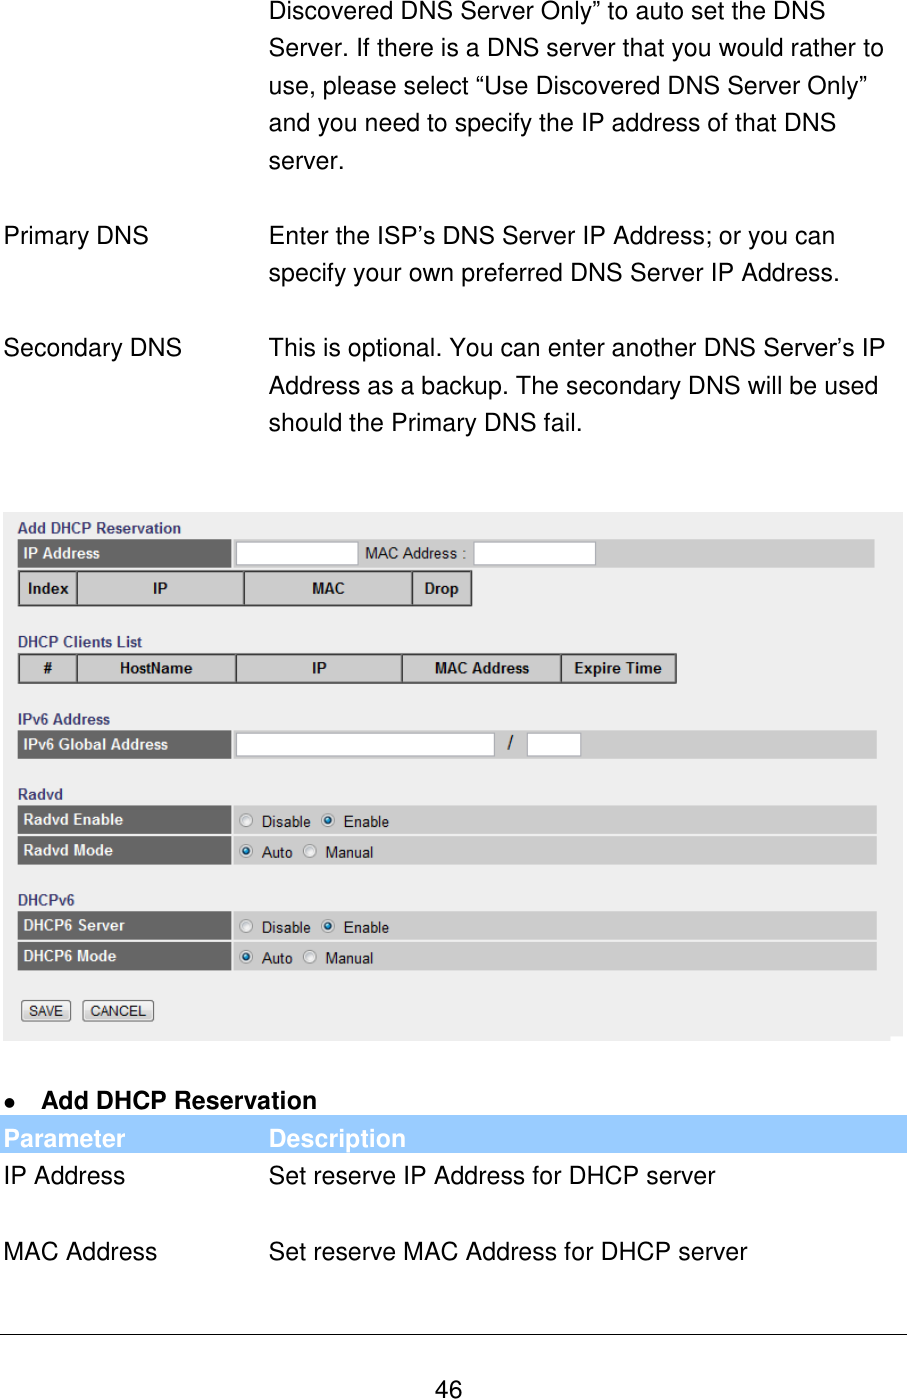   46 Discovered DNS Server Only” to auto set the DNS Server. If there is a DNS server that you would rather to use, please select “Use Discovered DNS Server Only” and you need to specify the IP address of that DNS server.   Primary DNS Enter the ISP’s DNS Server IP Address; or you can specify your own preferred DNS Server IP Address.   Secondary DNS This is optional. You can enter another DNS Server’s IP Address as a backup. The secondary DNS will be used should the Primary DNS fail.      Add DHCP Reservation Parameter Description IP Address Set reserve IP Address for DHCP server   MAC Address Set reserve MAC Address for DHCP server   